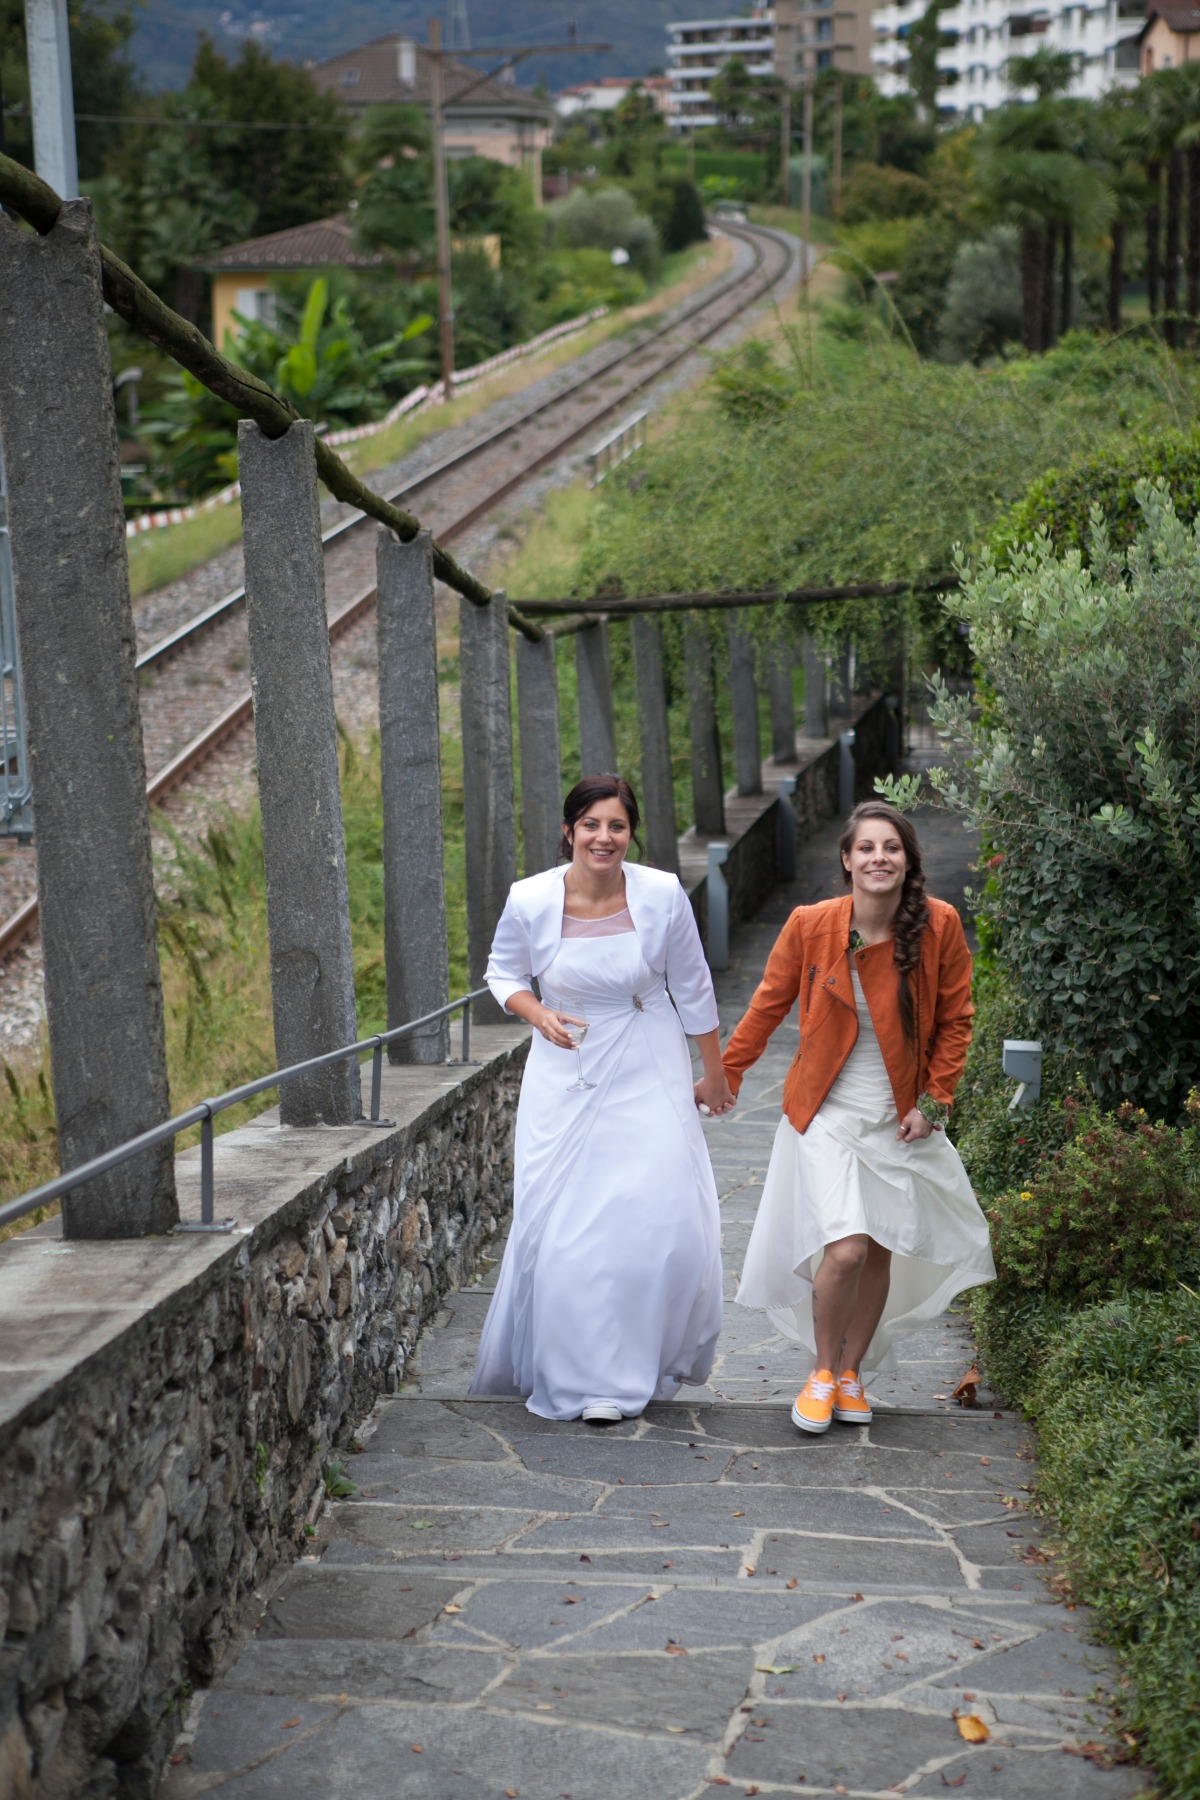 Sweet Wedding in Lake Maggiore Planned in Just Three Months